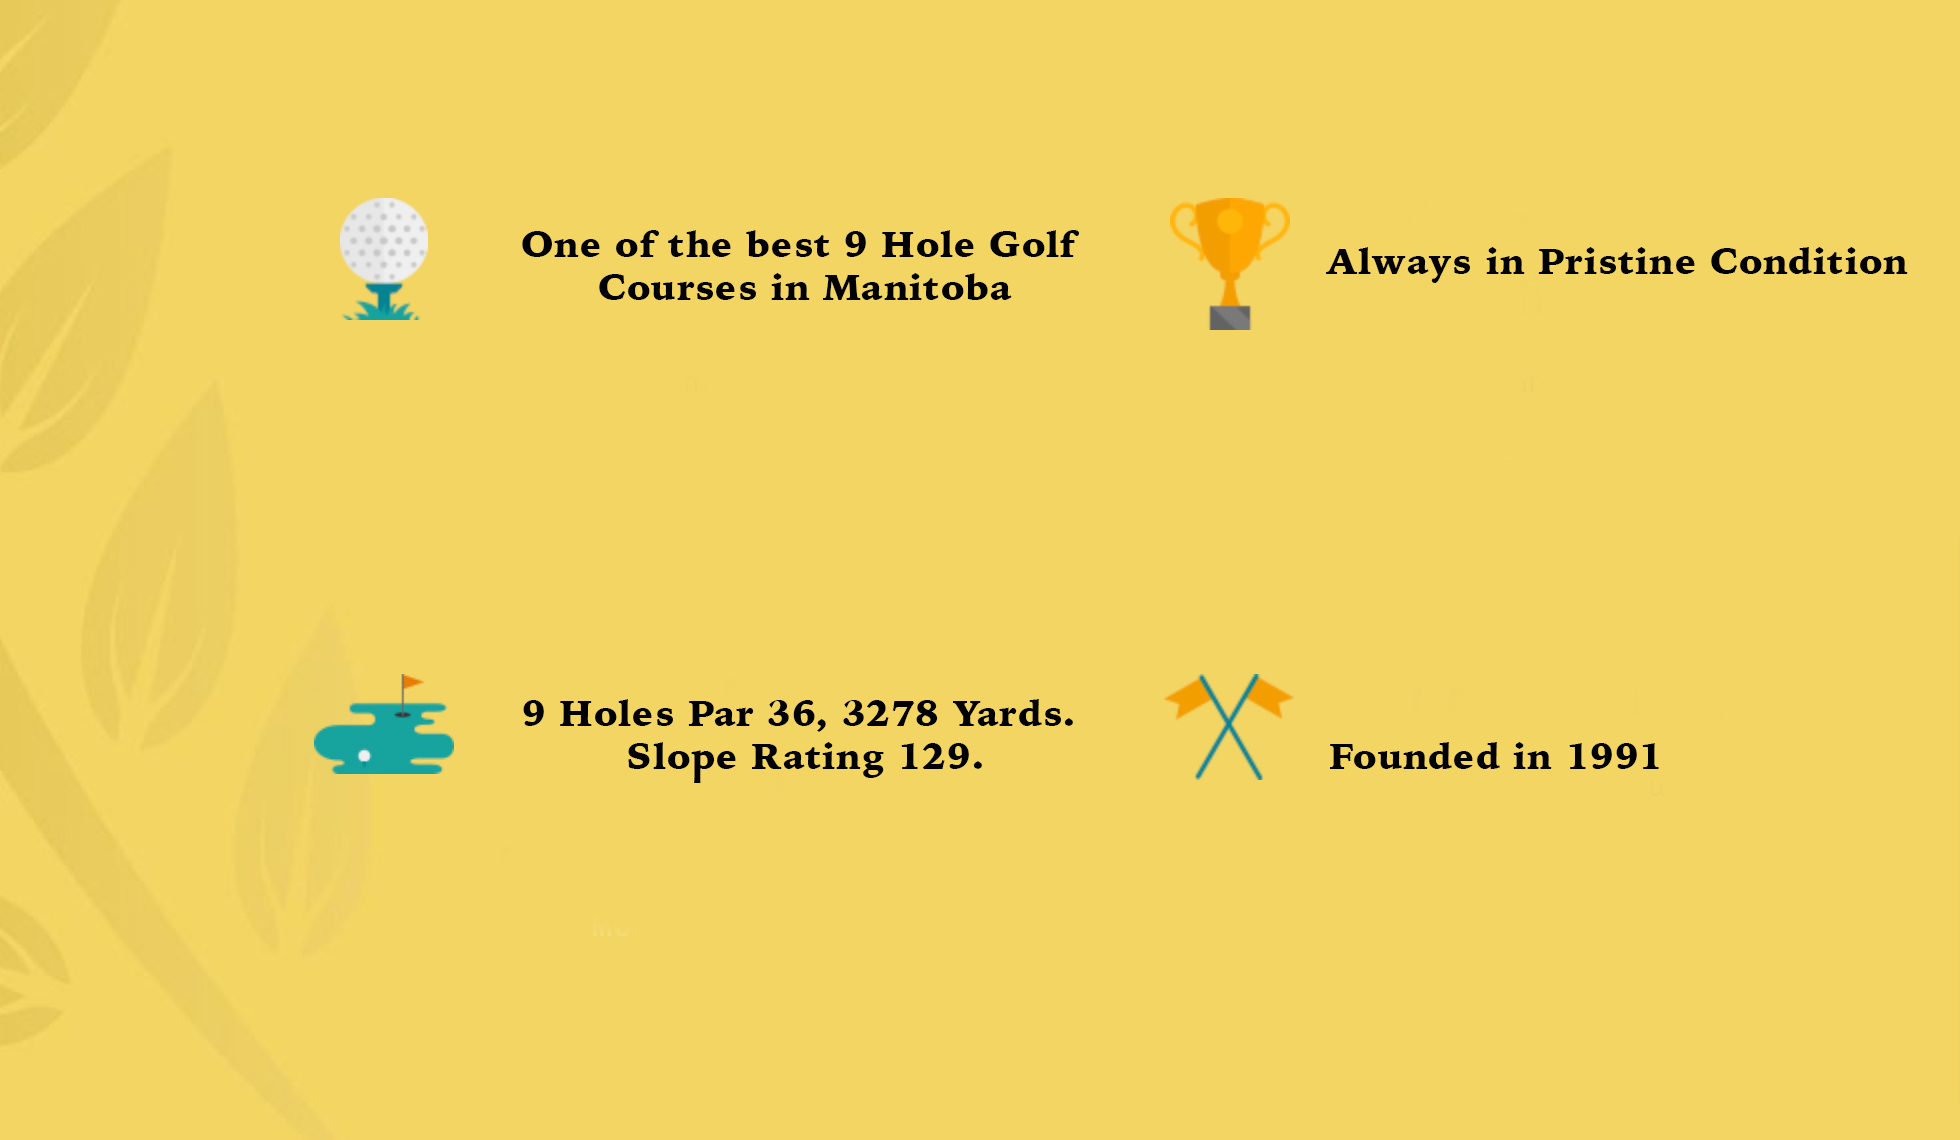 Reasons to golf at Lorette Golf Course "One of the best 9 Hole Golf Courses in Manitoba" "9 Holes Par 36, 3278. Slope Rating 129." "Always in Pristine Condition" "Founded in 1991"